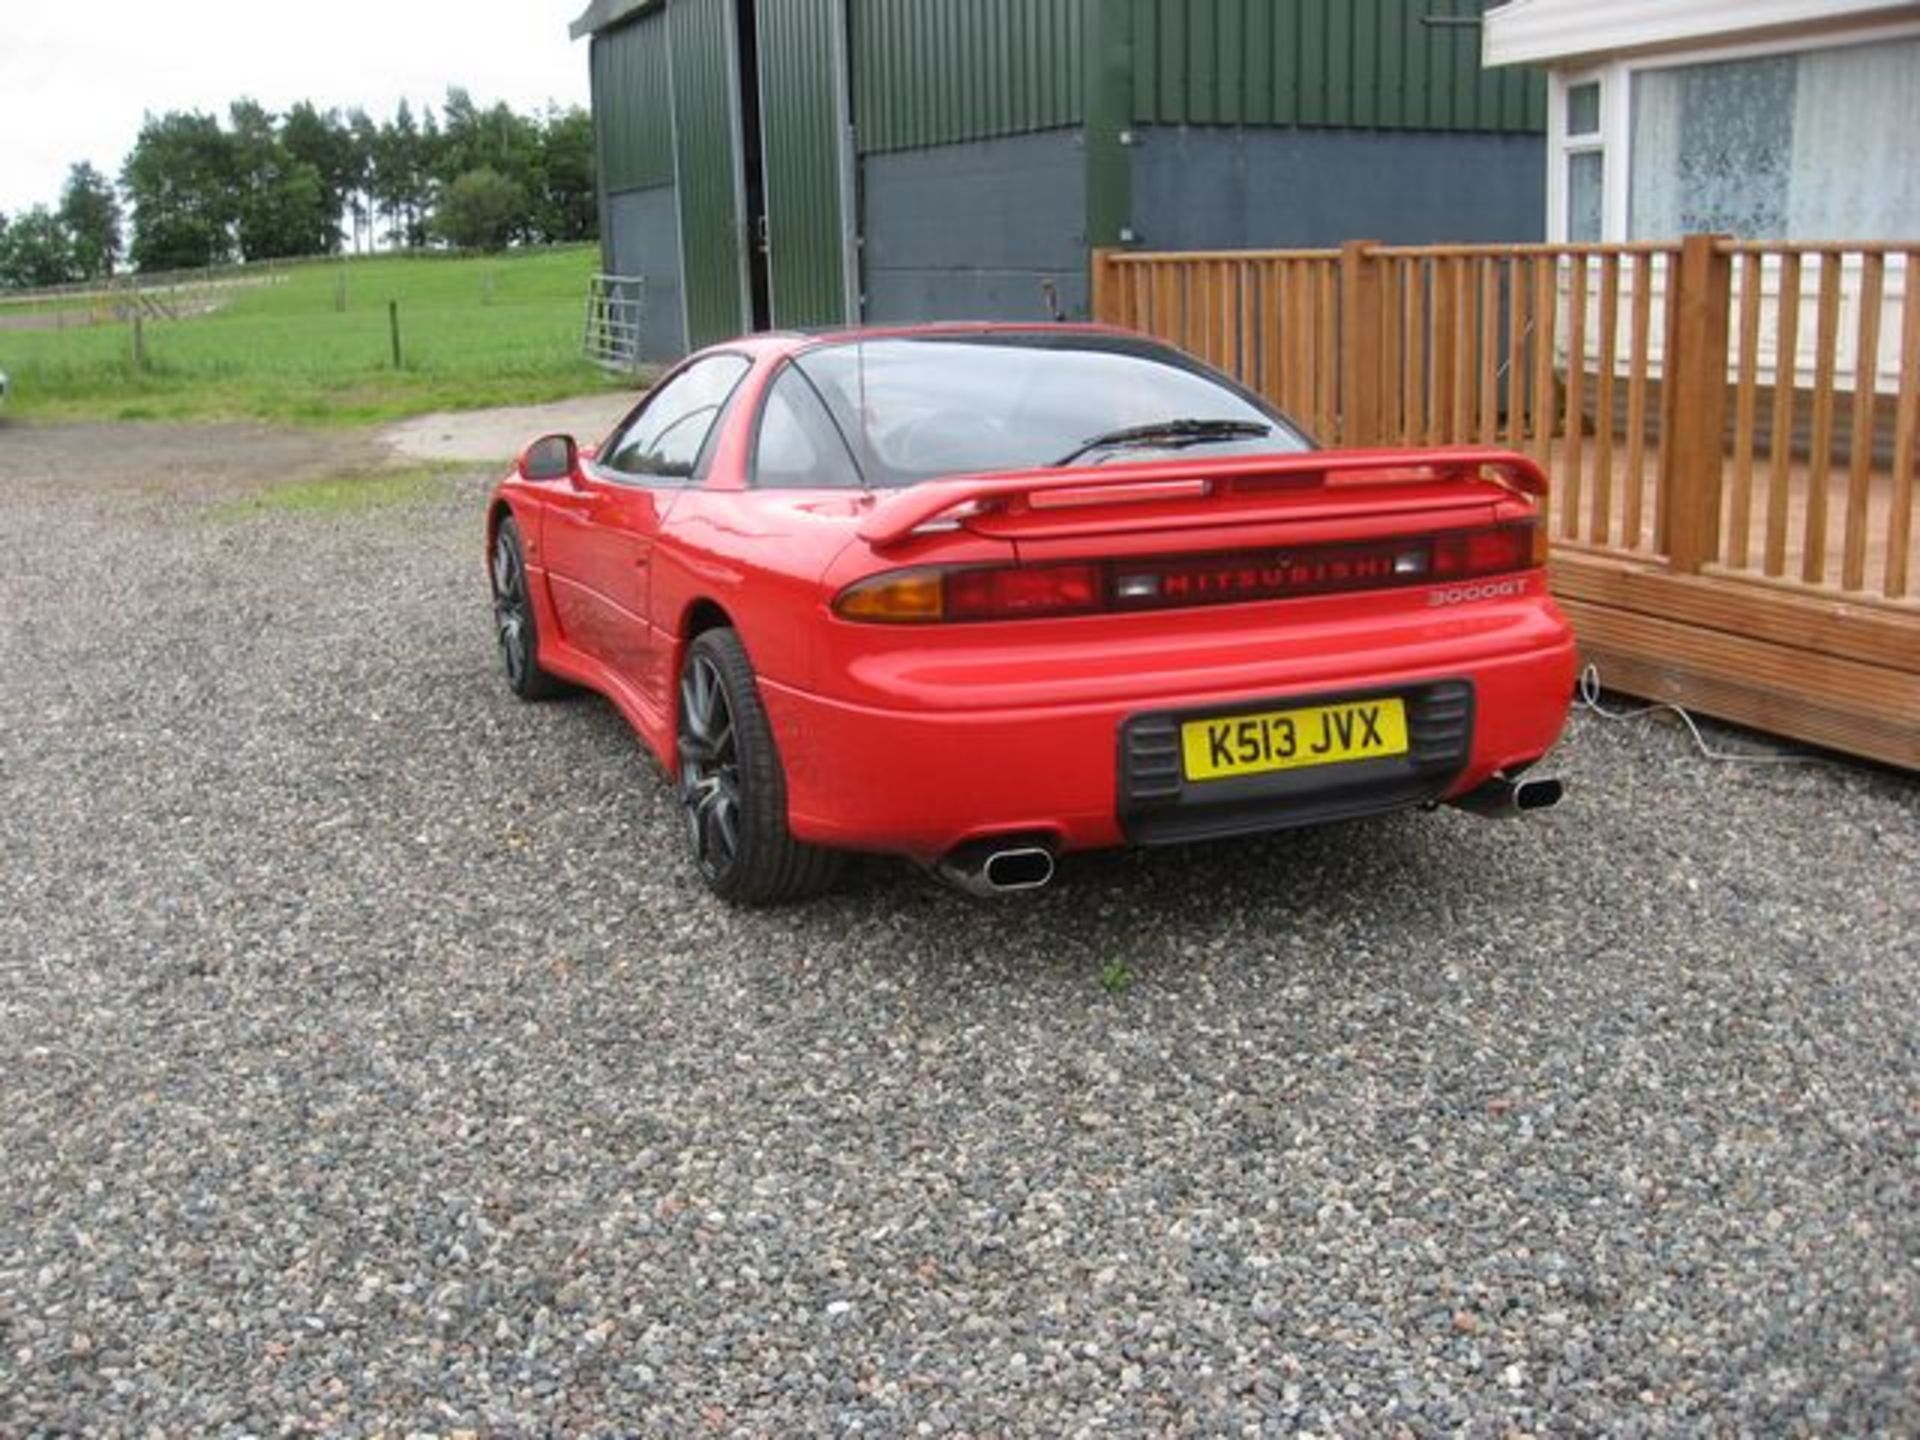 MITSUBISHI, 3000 GT V6 TURBO - 2972cc, Chassis number JMAMNZ16APY000228 - presented with an - Image 4 of 17